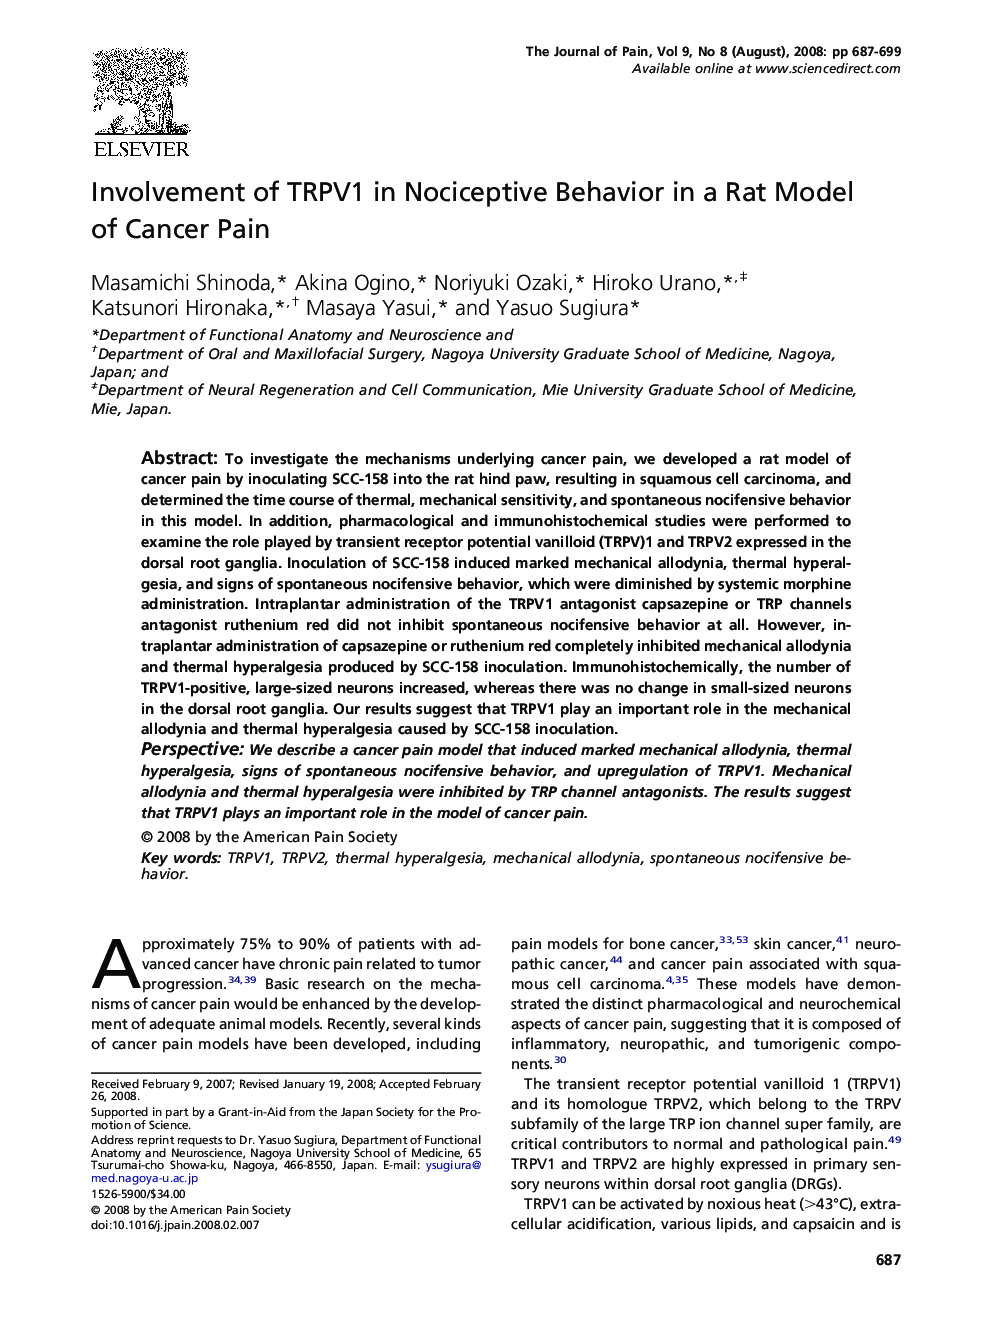 Involvement of TRPV1 in Nociceptive Behavior in a Rat Model of Cancer Pain 